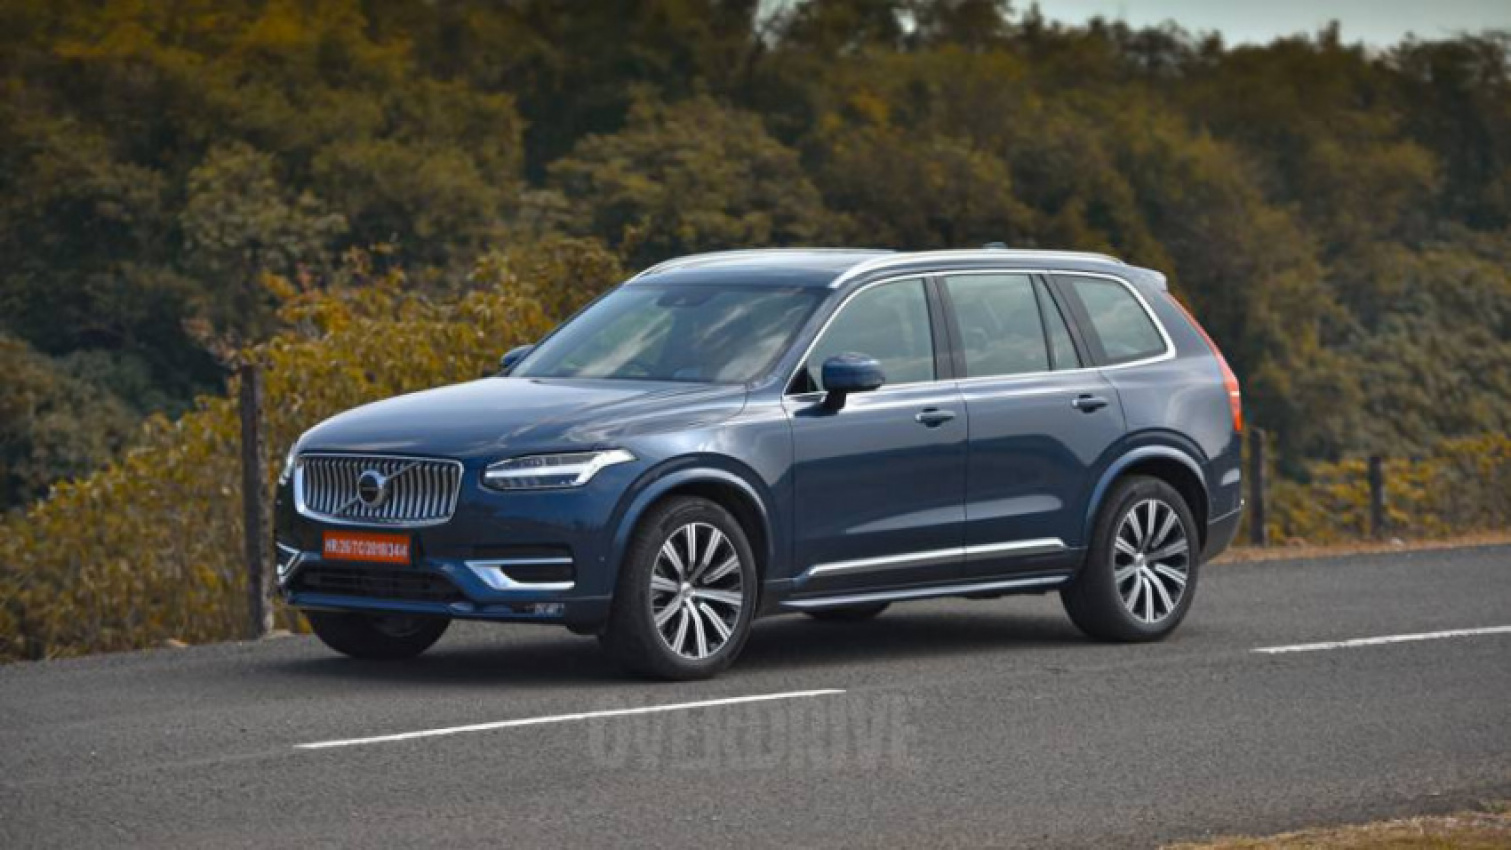 autos, cars, reviews, volvo, new cars 2022, new suvs 2022, overdrive, vnex, volvo car, volvo xc90, volvo xc90 2022, volvo xc90 7 seater, volvo xc90 7 seater interior, volvo xc90 7 seater price, volvo xc90 b6 petrol review india, volvo xc90 facelift 2022, volvo xc90 features, volvo xc90 inscription petrol, volvo xc90 interiors, volvo xc90 mileage, volvo xc90 petrol 2022, volvo xc90 petrol car mileage, volvo xc90 petrol images, volvo xc90 petrol india, volvo xc90 petrol interiors, volvo xc90 petrol price 2022, volvo xc90 petrol review 2022, volvo xc90 petrol review india 2022, volvo xc90 petrol specifications, volvo xc90 review india 2022, volvo xc90 road test india 2022, volvo xc90 test drive india 2022, xc90 petrol mild hybrid price, xc90 petrol mild hybrid review, xc90 price india, 2022 volvo xc90 b6 petrol road test review